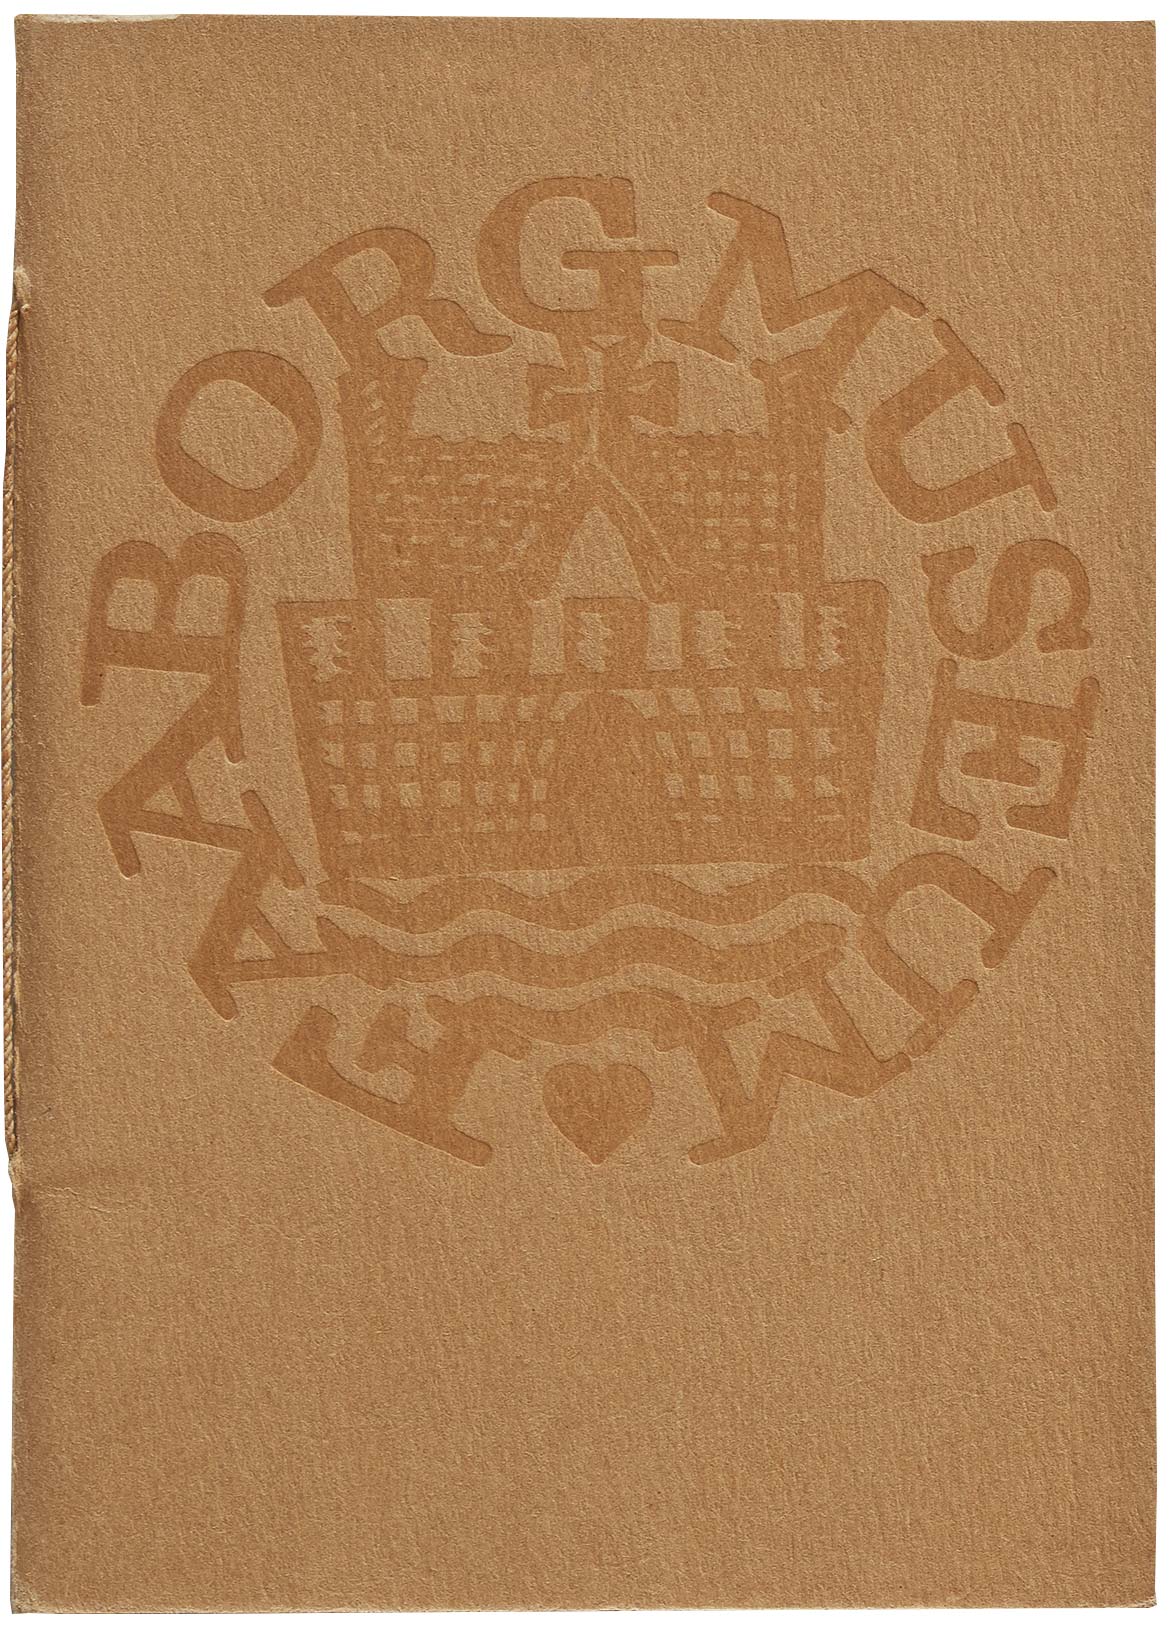 Faaborg Museum’s logo on the cover of the first edition of the museum catalogue by Knud V. Engelhardt, 1916.